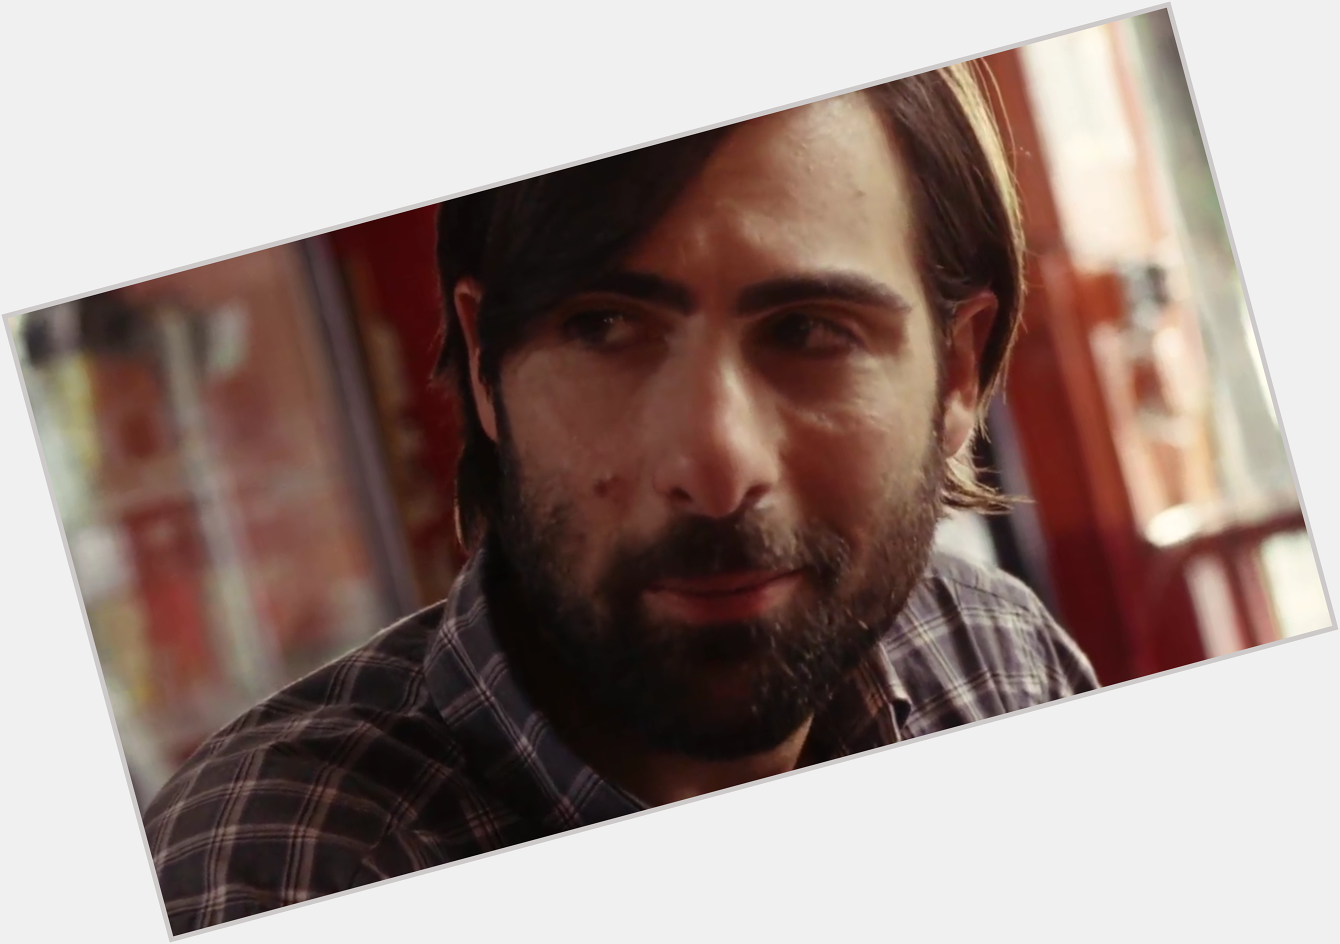 Happy Bday Jason Schwartzman! Here he is as the difficult title character in LISTEN UP PHILIP  